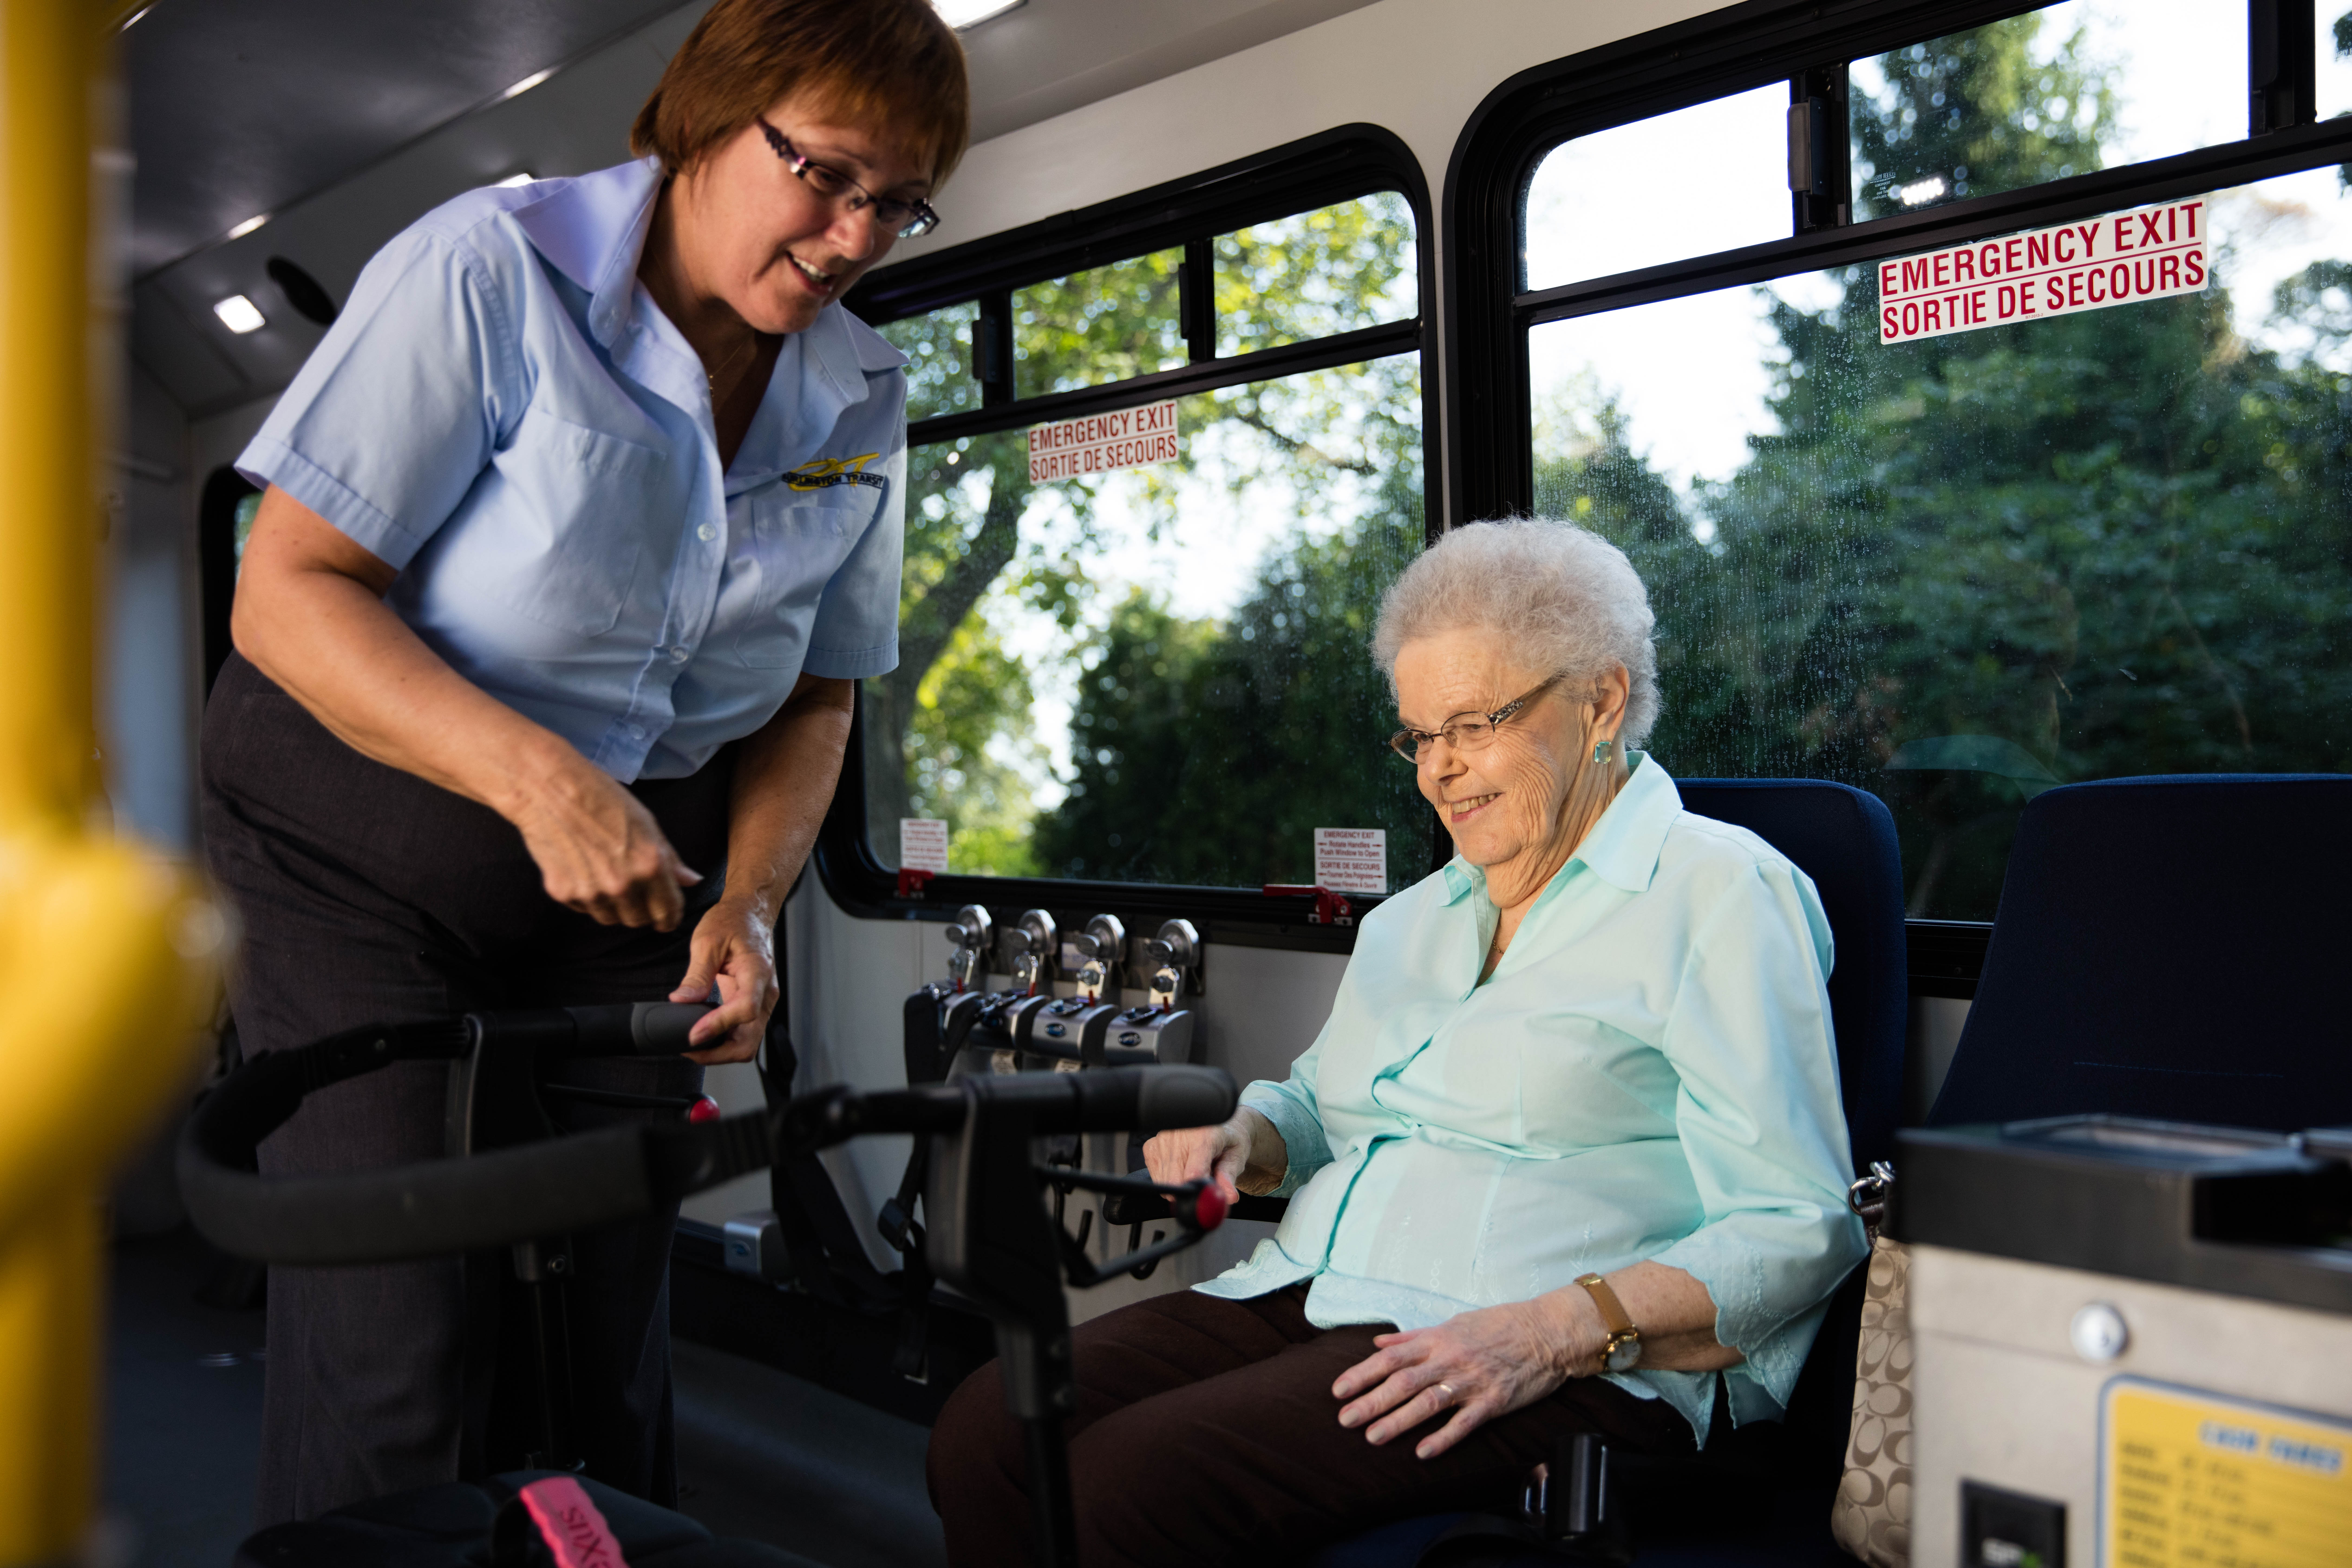 A bus operator helps a senior woman who is sitting on a bus and smiling looking down at her walker.